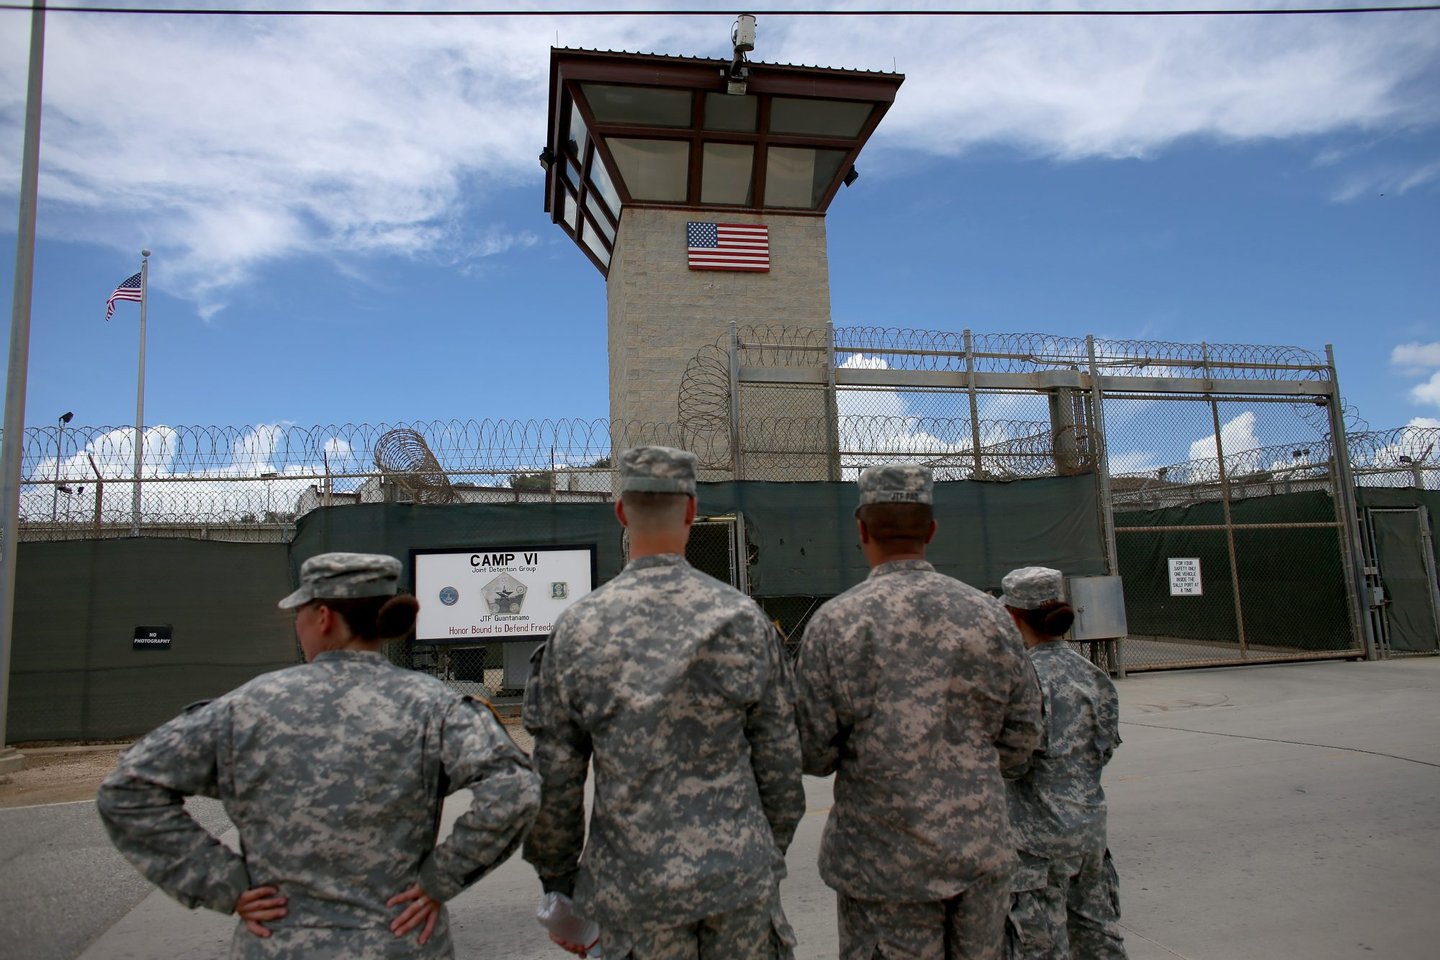 GUANTANAMO BAY, CUBA - JUNE 25: (EDITORS NOTE: Image has been reviewed by the U.S. Military prior to transmission.) Military officers stand at the entrance to Camp VI and V at the U.S. military prison for 'enemy combatants' on June 25, 2013 in Guantanamo Bay, Cuba. President Barack Obama has recently spoken again about closing the prison which has been used to hold prisoners from the invasion of Afghanistan and the war on terror since early 2002. (Photo by Joe Raedle/Getty Images)